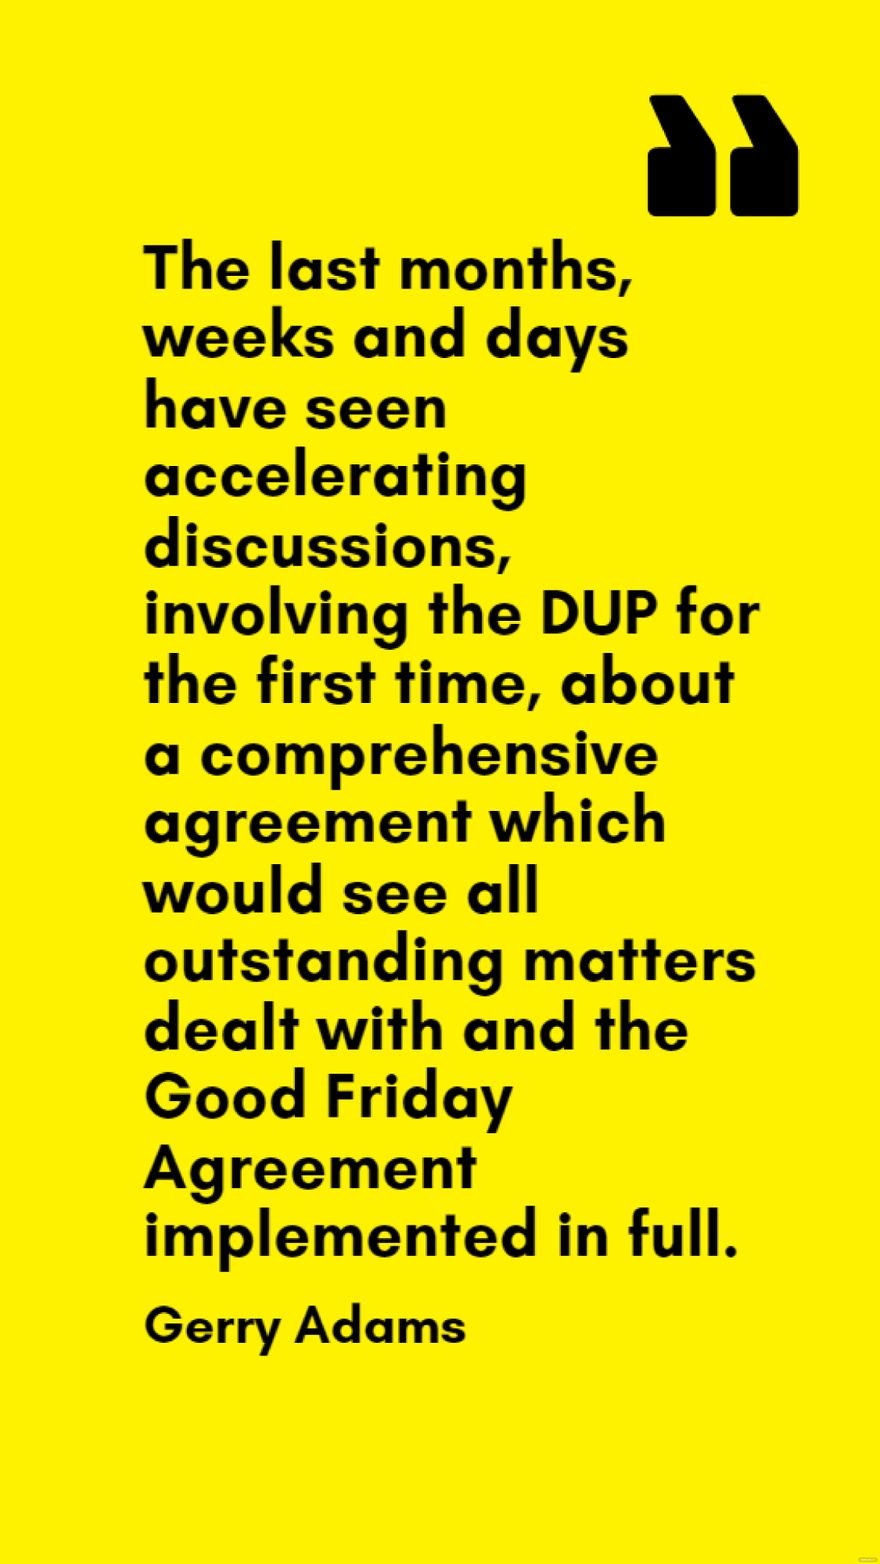 Gerry Adams - The last months, weeks and days have seen accelerating discussions, involving the DUP for the first time, about a comprehensive agreement which would see all outstanding matters dealt wi